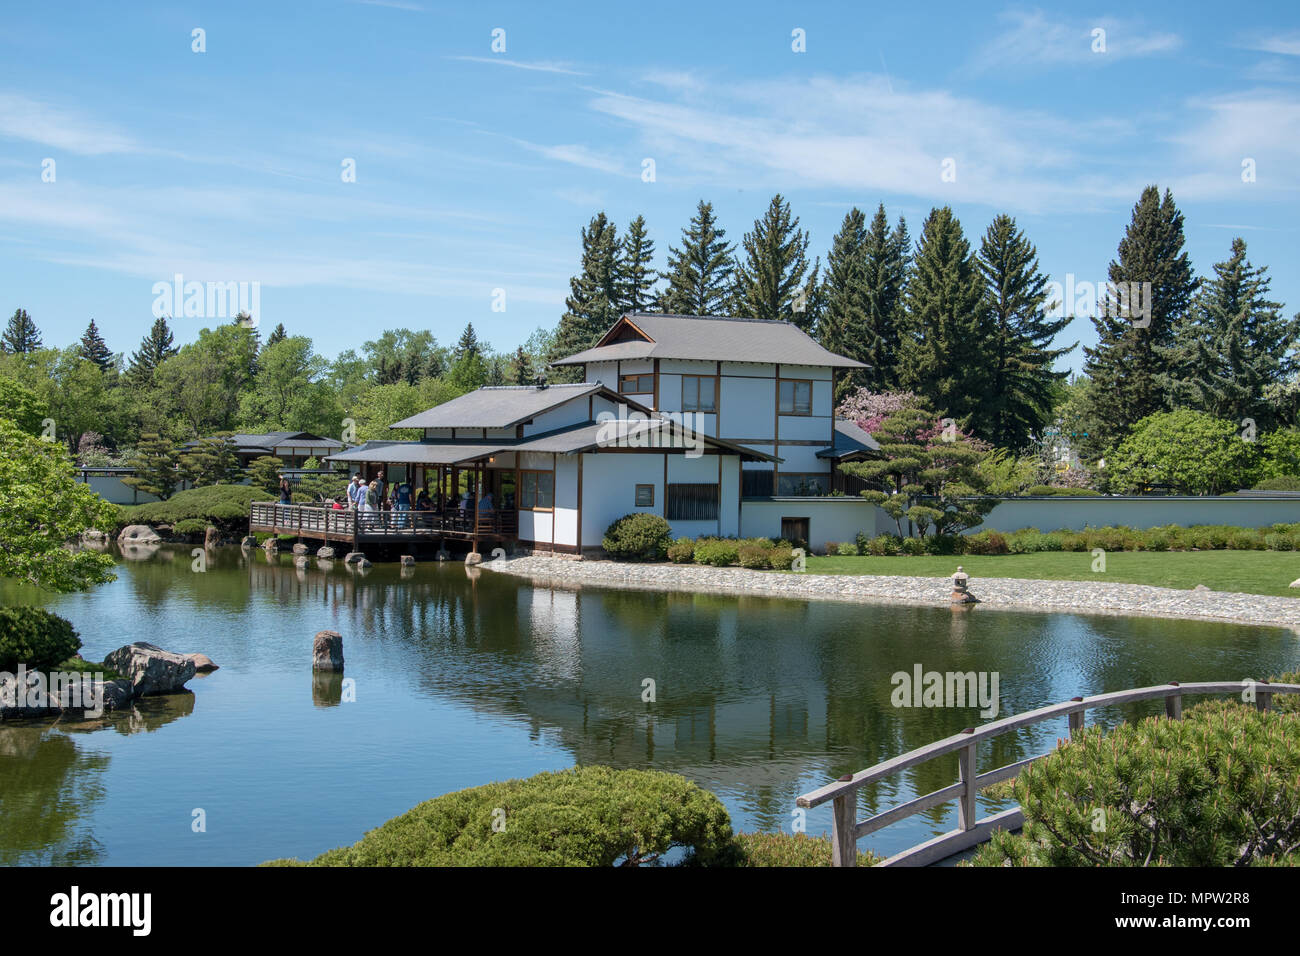 Pavillion modelled on a Tea House in Nikka Yuko Japanese Garden in Lethbridge, Alberta opened in 1967. All components were built in Kyoto, Japan and r Stock Photo